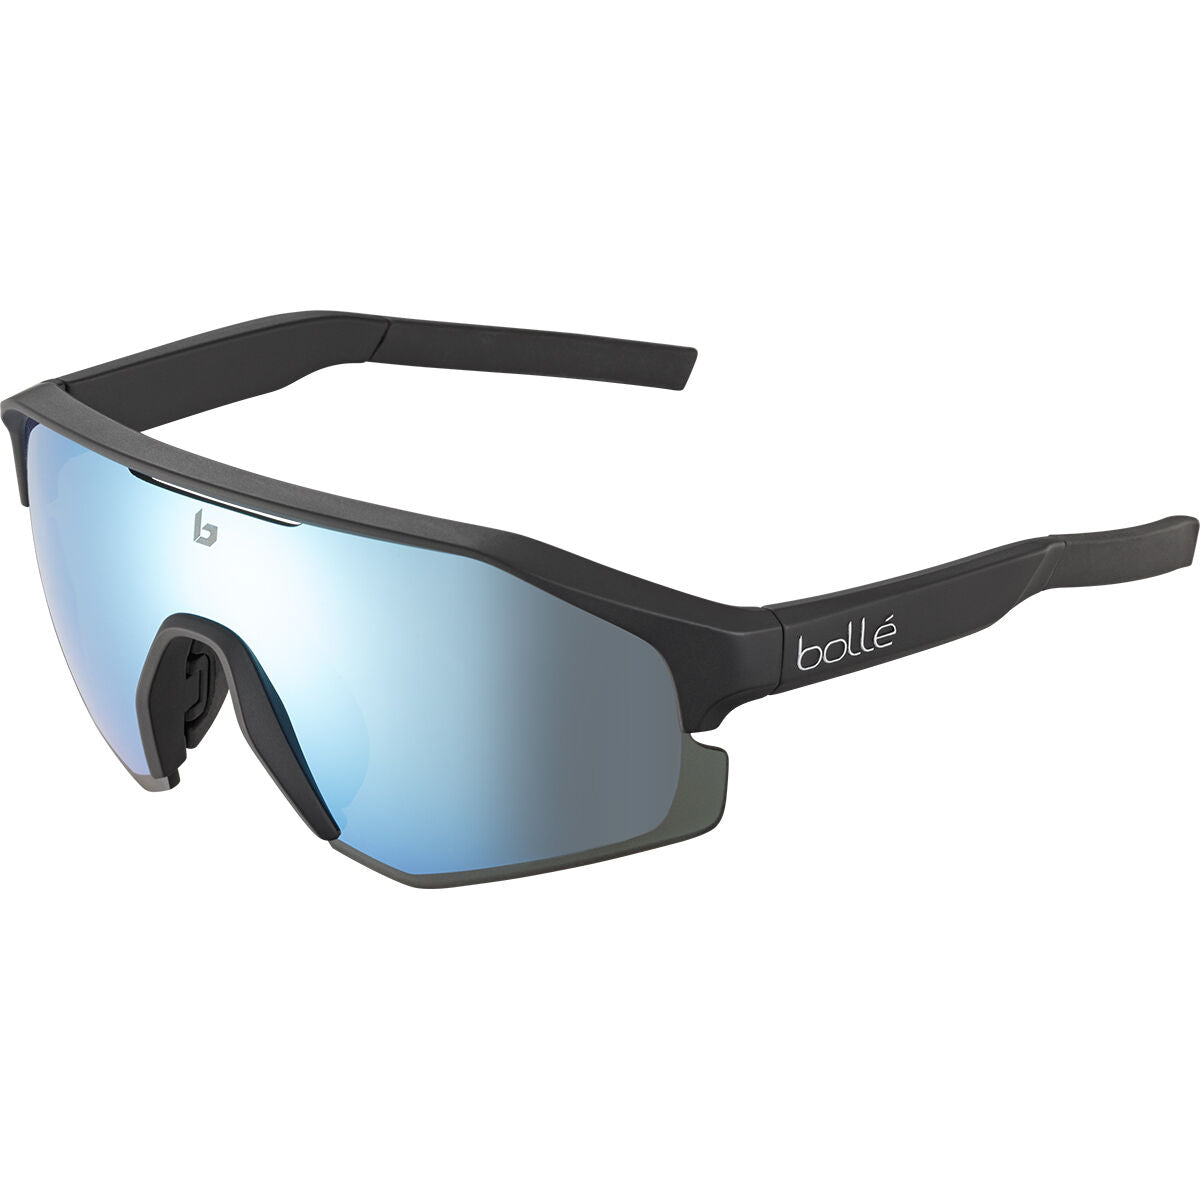 Bolle Lightshifter Sunglasses  Matte Black Tns Ice One Size